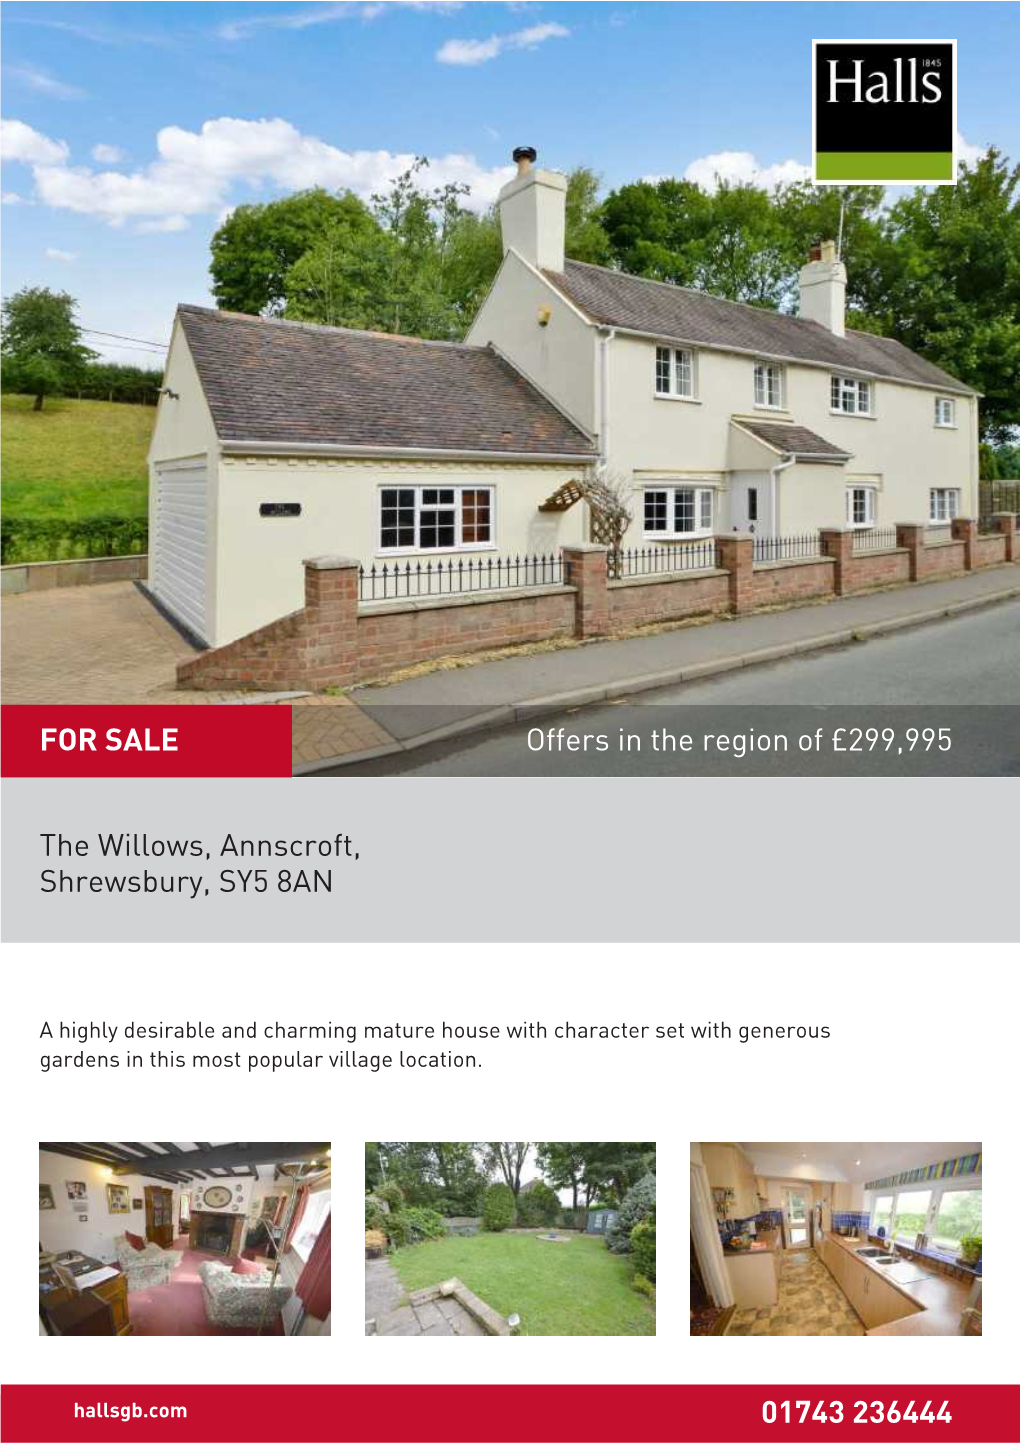 The Willows, Annscroft, Shrewsbury, SY5 8AN 01743 236444 Offers in the Region of £299,995 for SALE